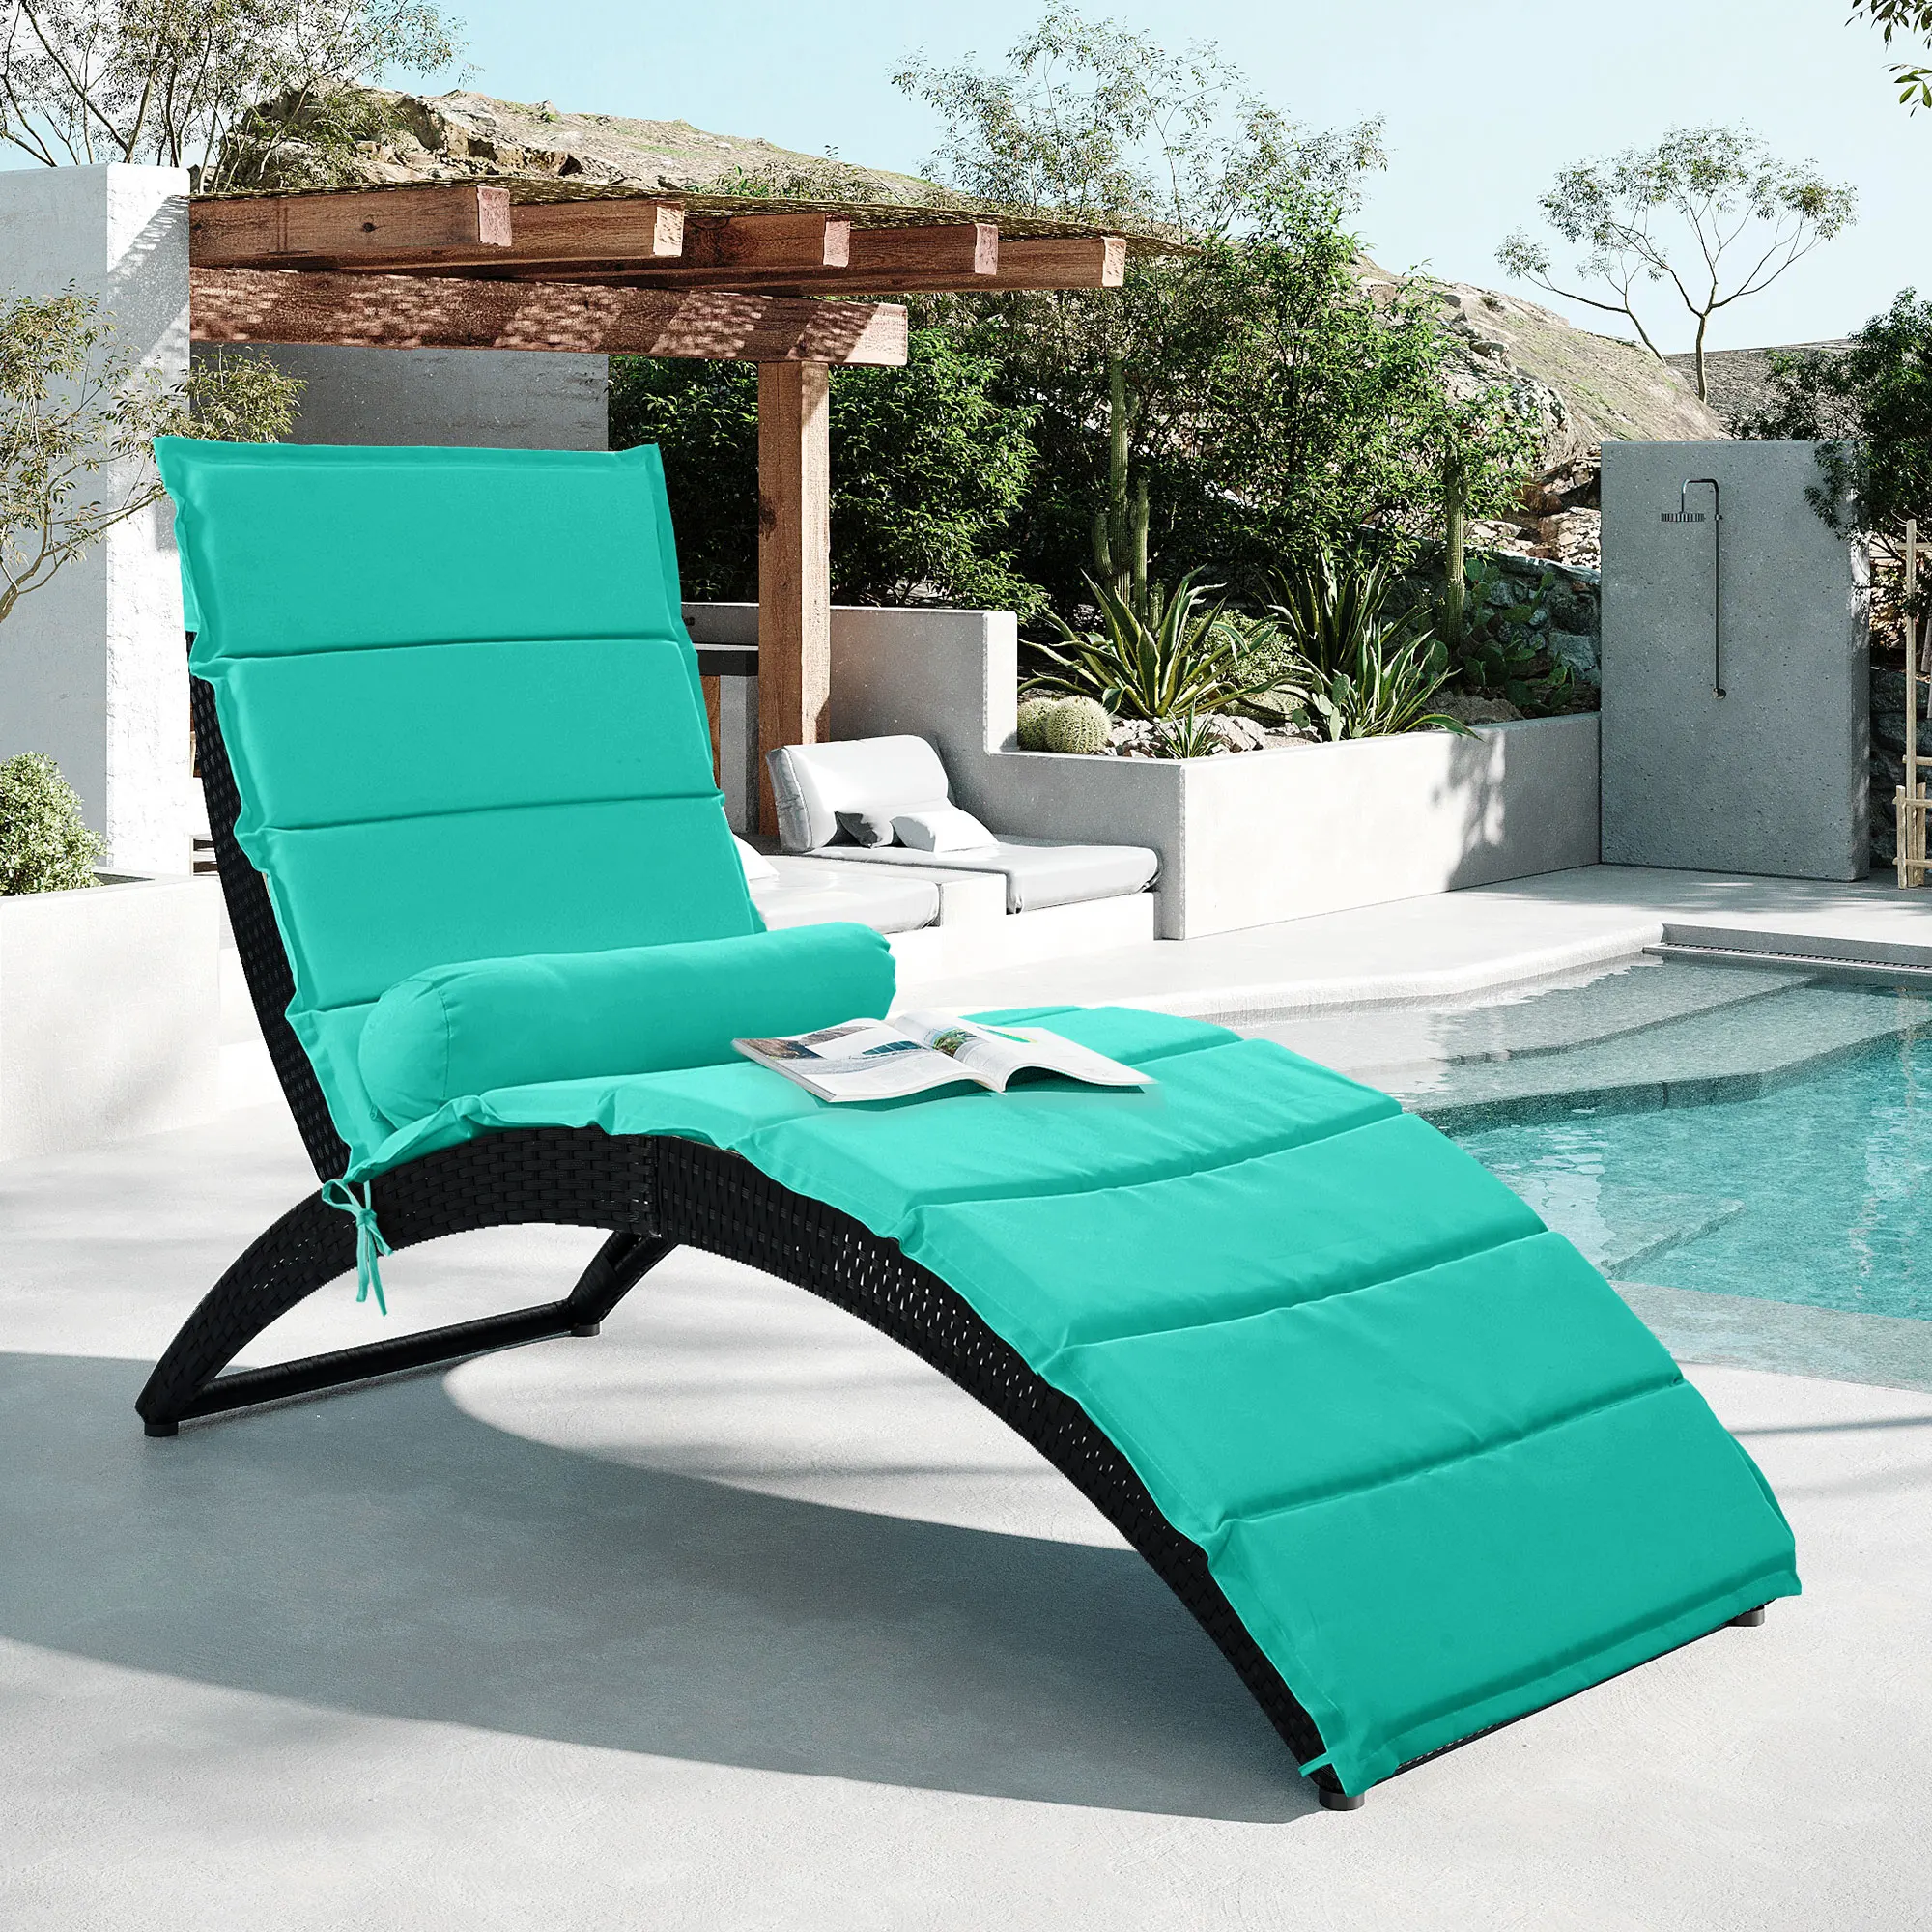 Patio Wicker Sun Lounger PE Rattan Foldable Chaise Lounger with Removable Cushion and Bolster Pillow patio wicker sun lounger pe rattan foldable chaise lounger with removable cushion and bolster pillow